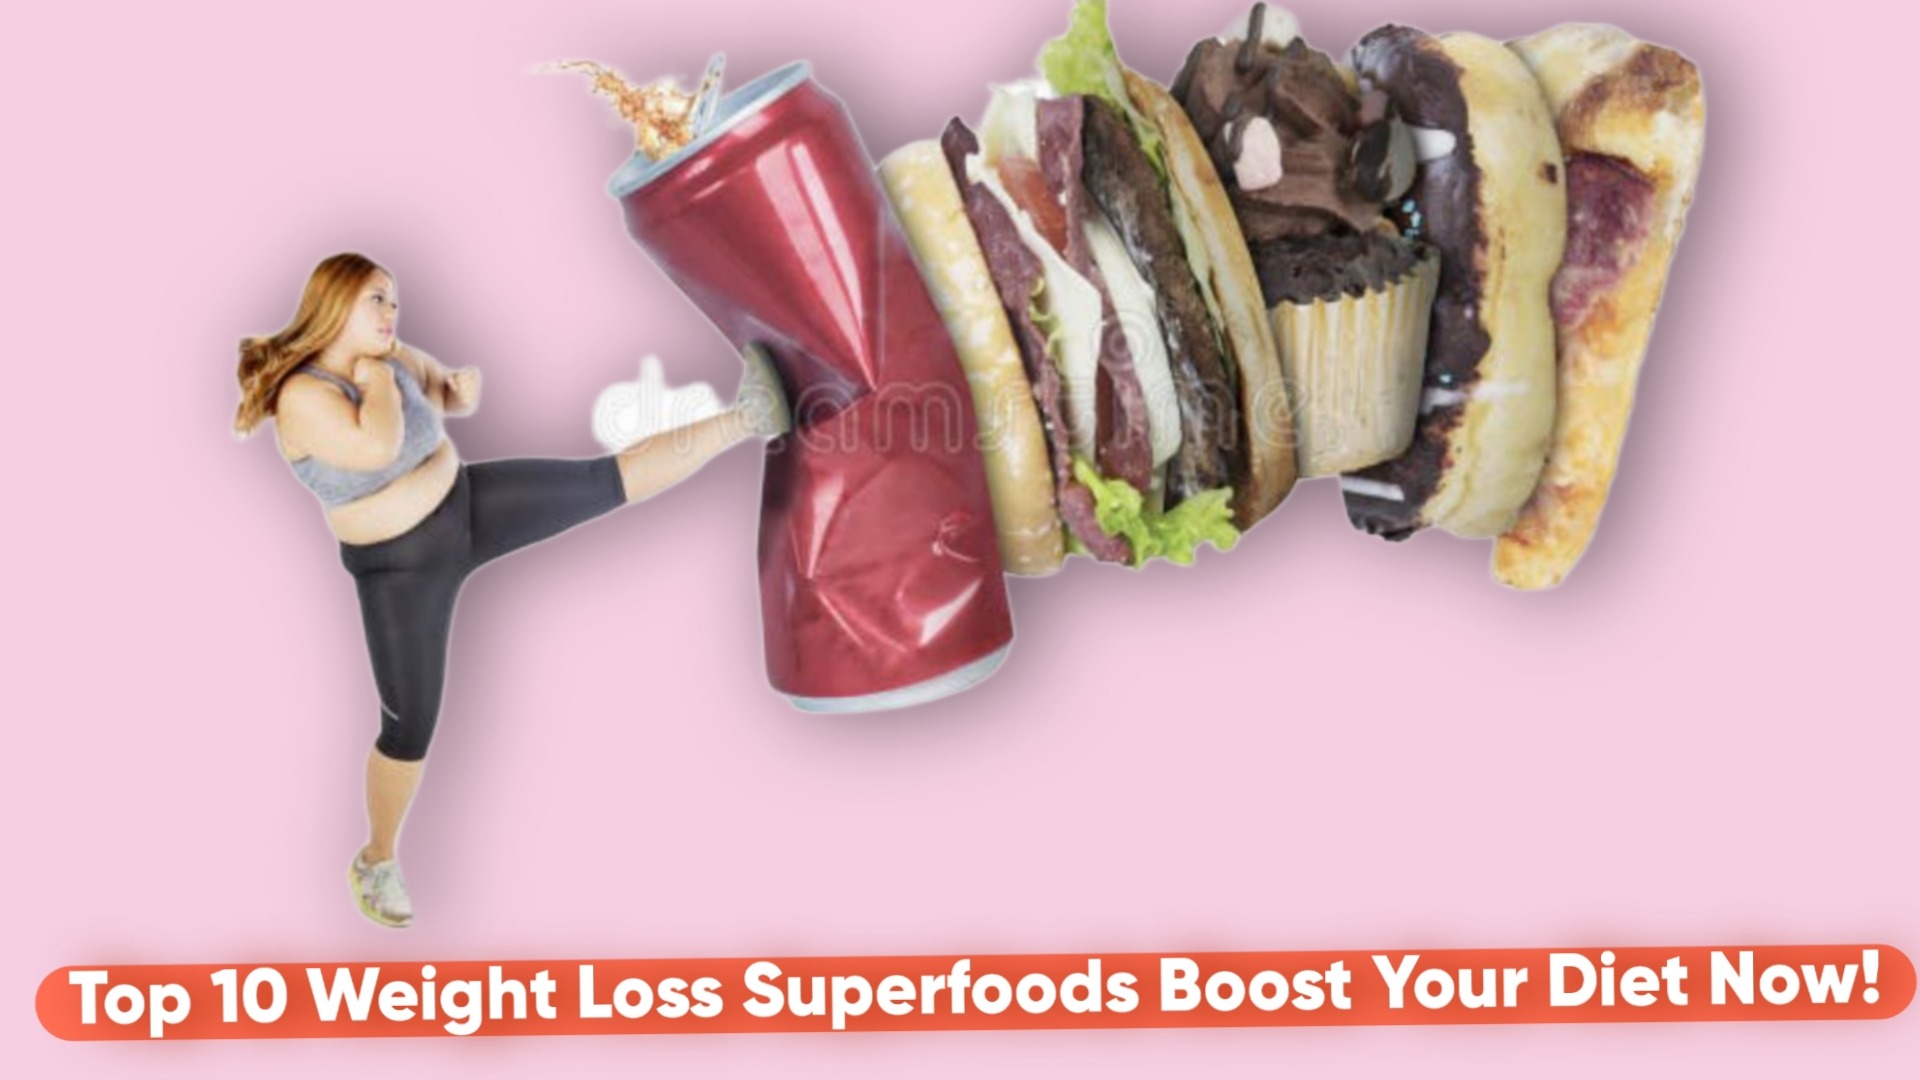 Top 10 Weight Loss Superfoods: Boost Your Diet Now!